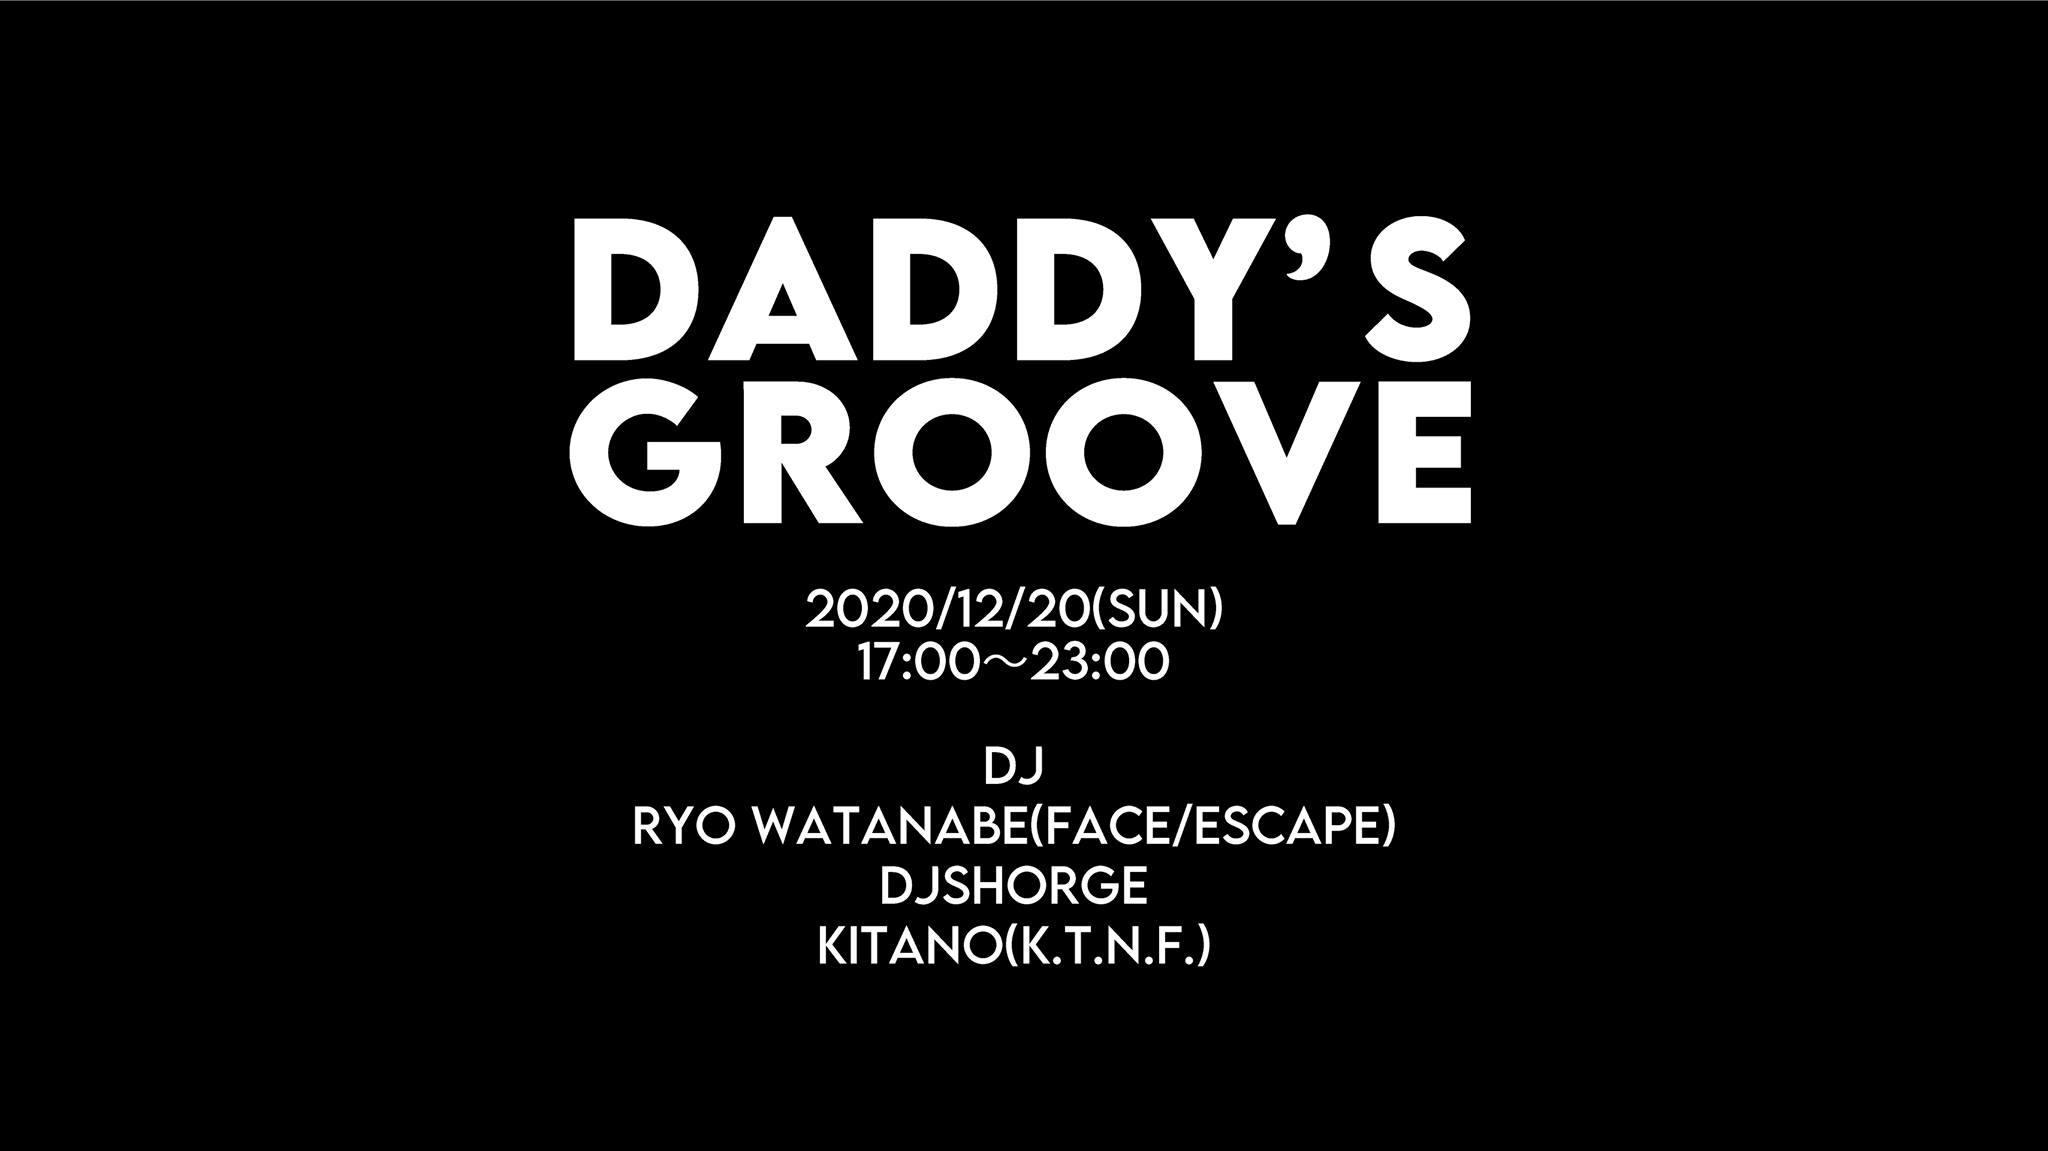 DADDY’S GROOVE